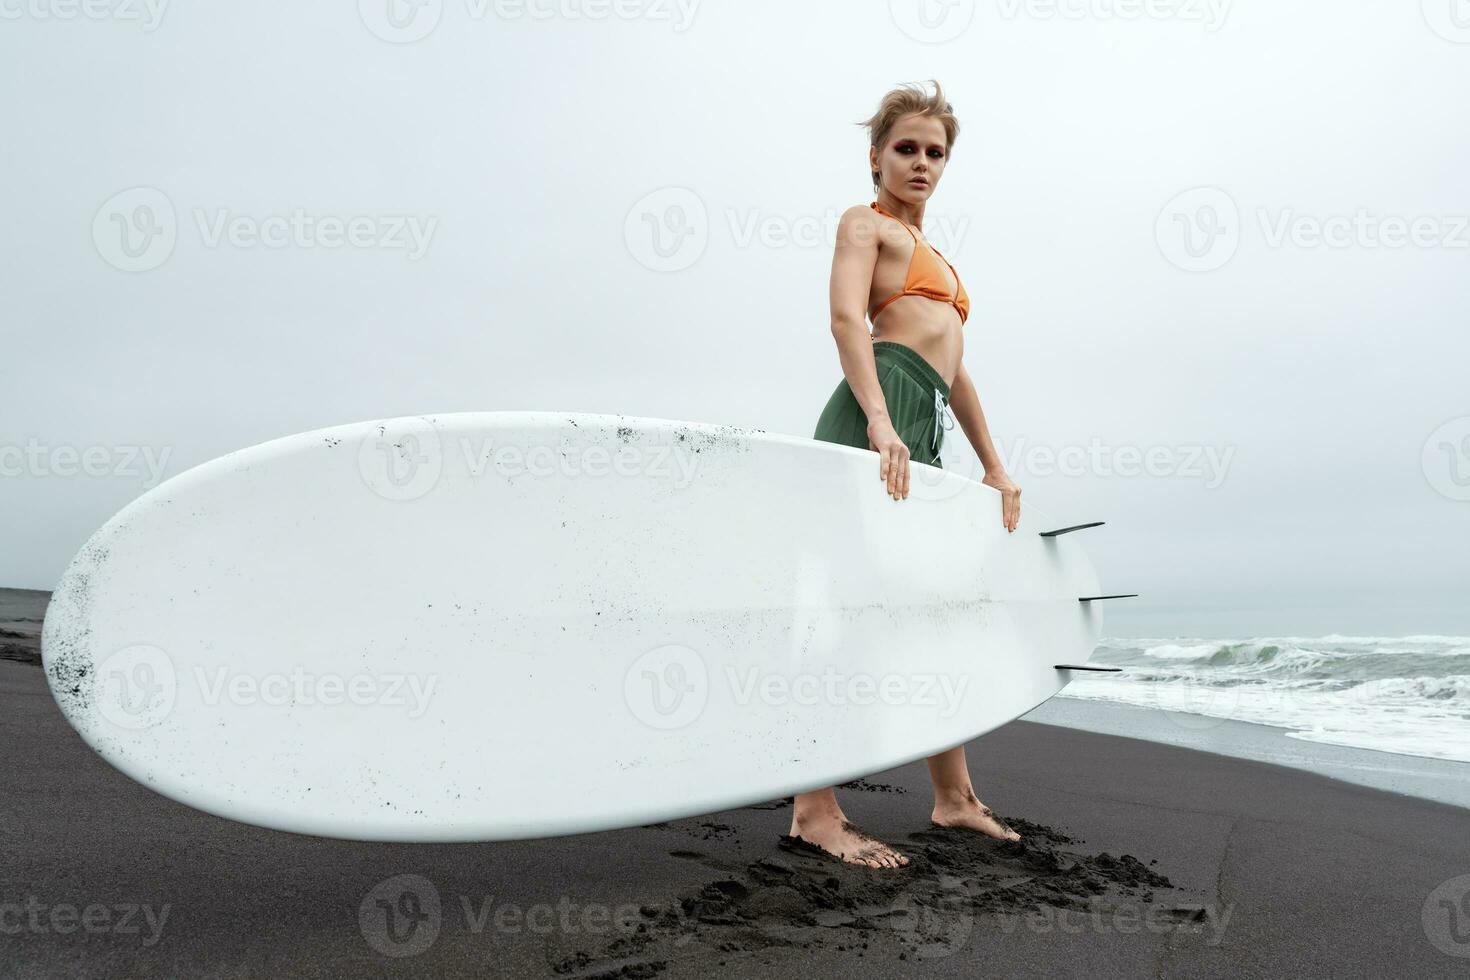 Female surfer standing on black sandy beach holding white surfboard against background of sea waves photo